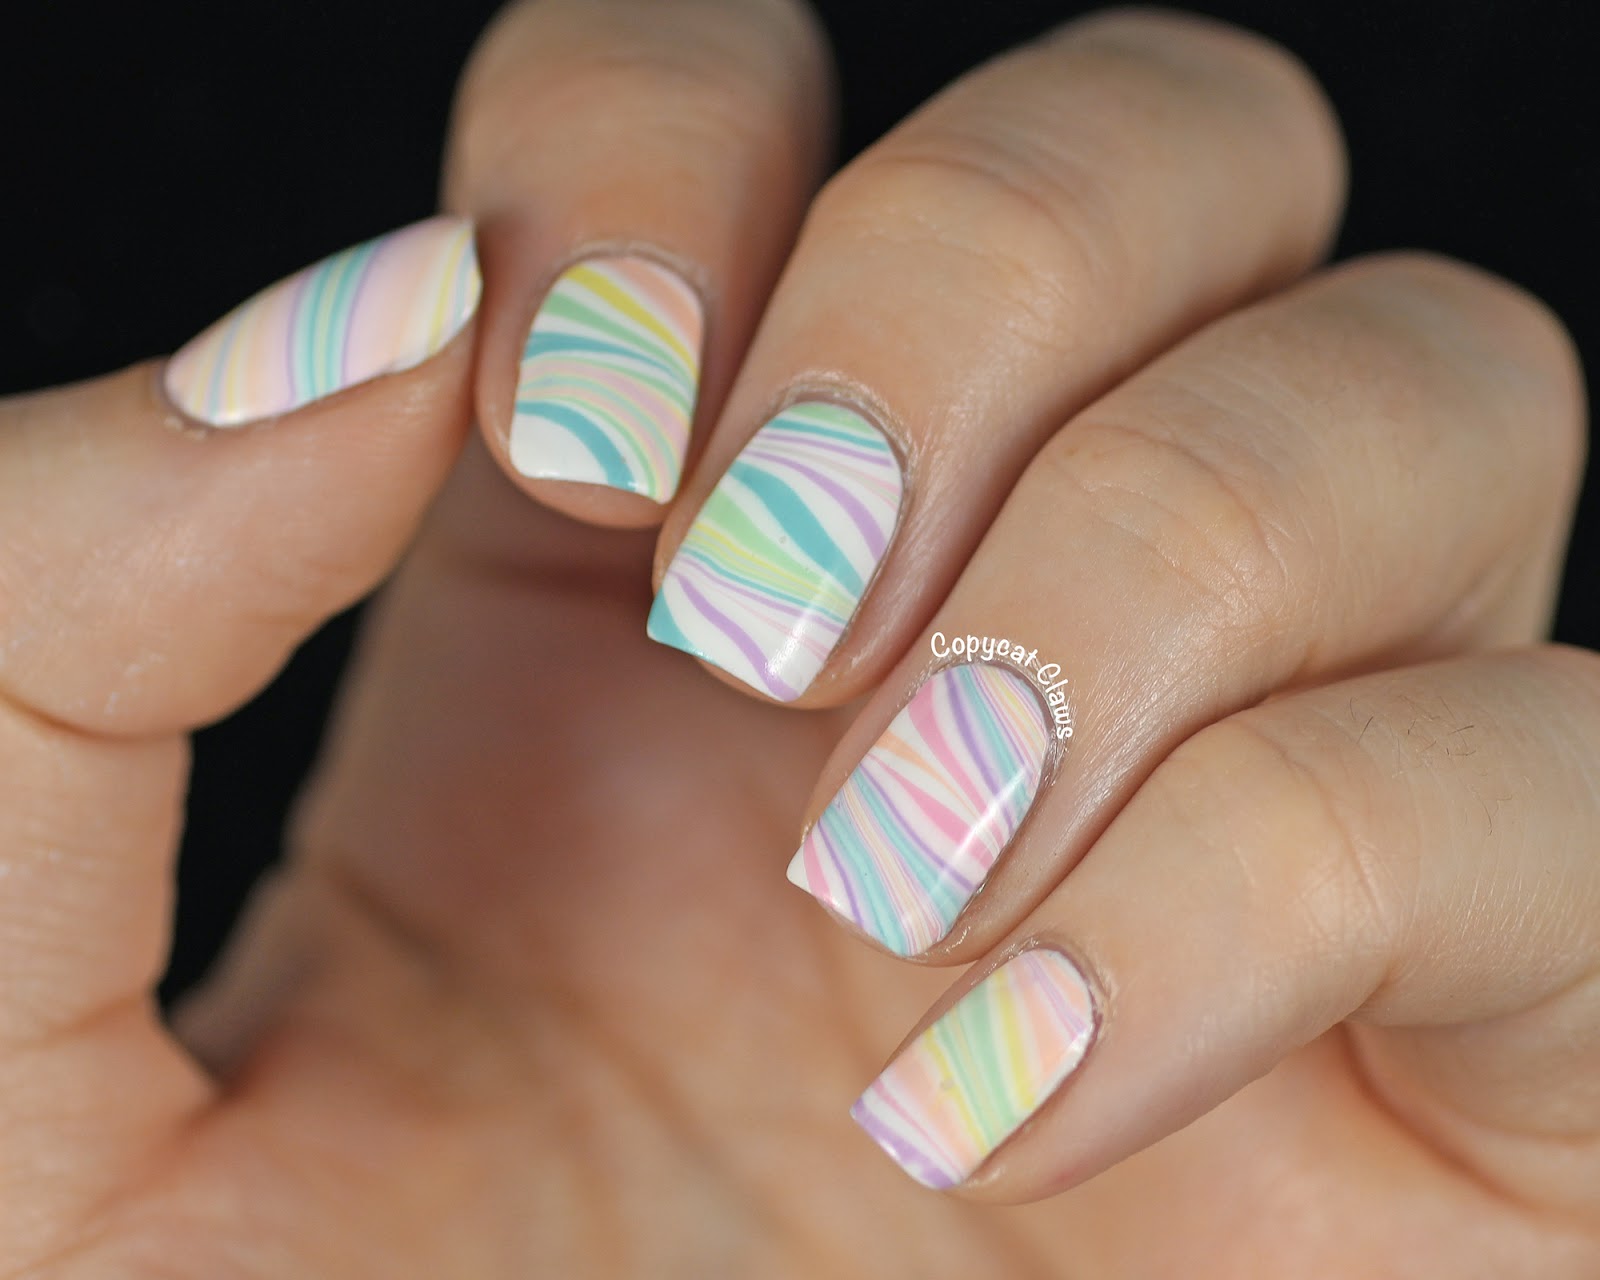 Water Marble Nail Art Tips and Tricks - wide 5